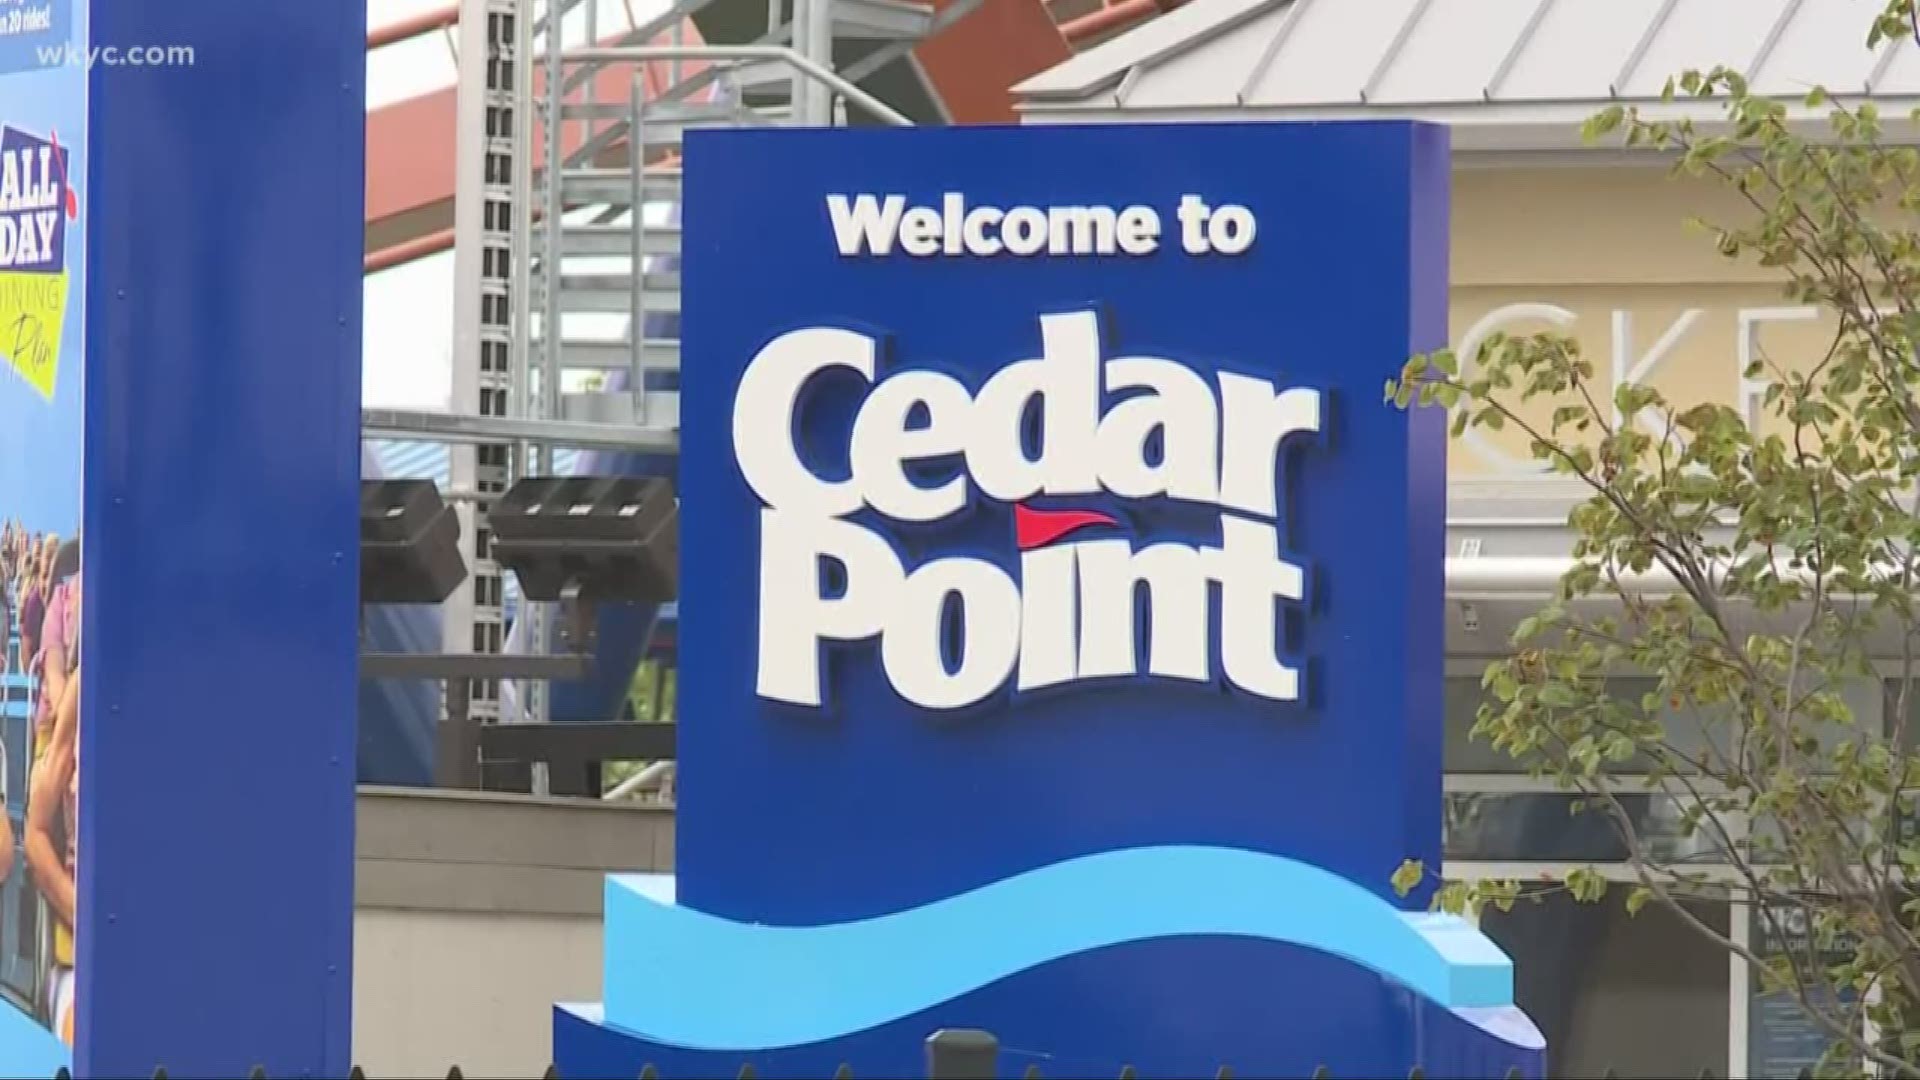 Over the weekend, Cedar Point nearly reached capacity and was forced to turn away patrons. On Monday the park explained.